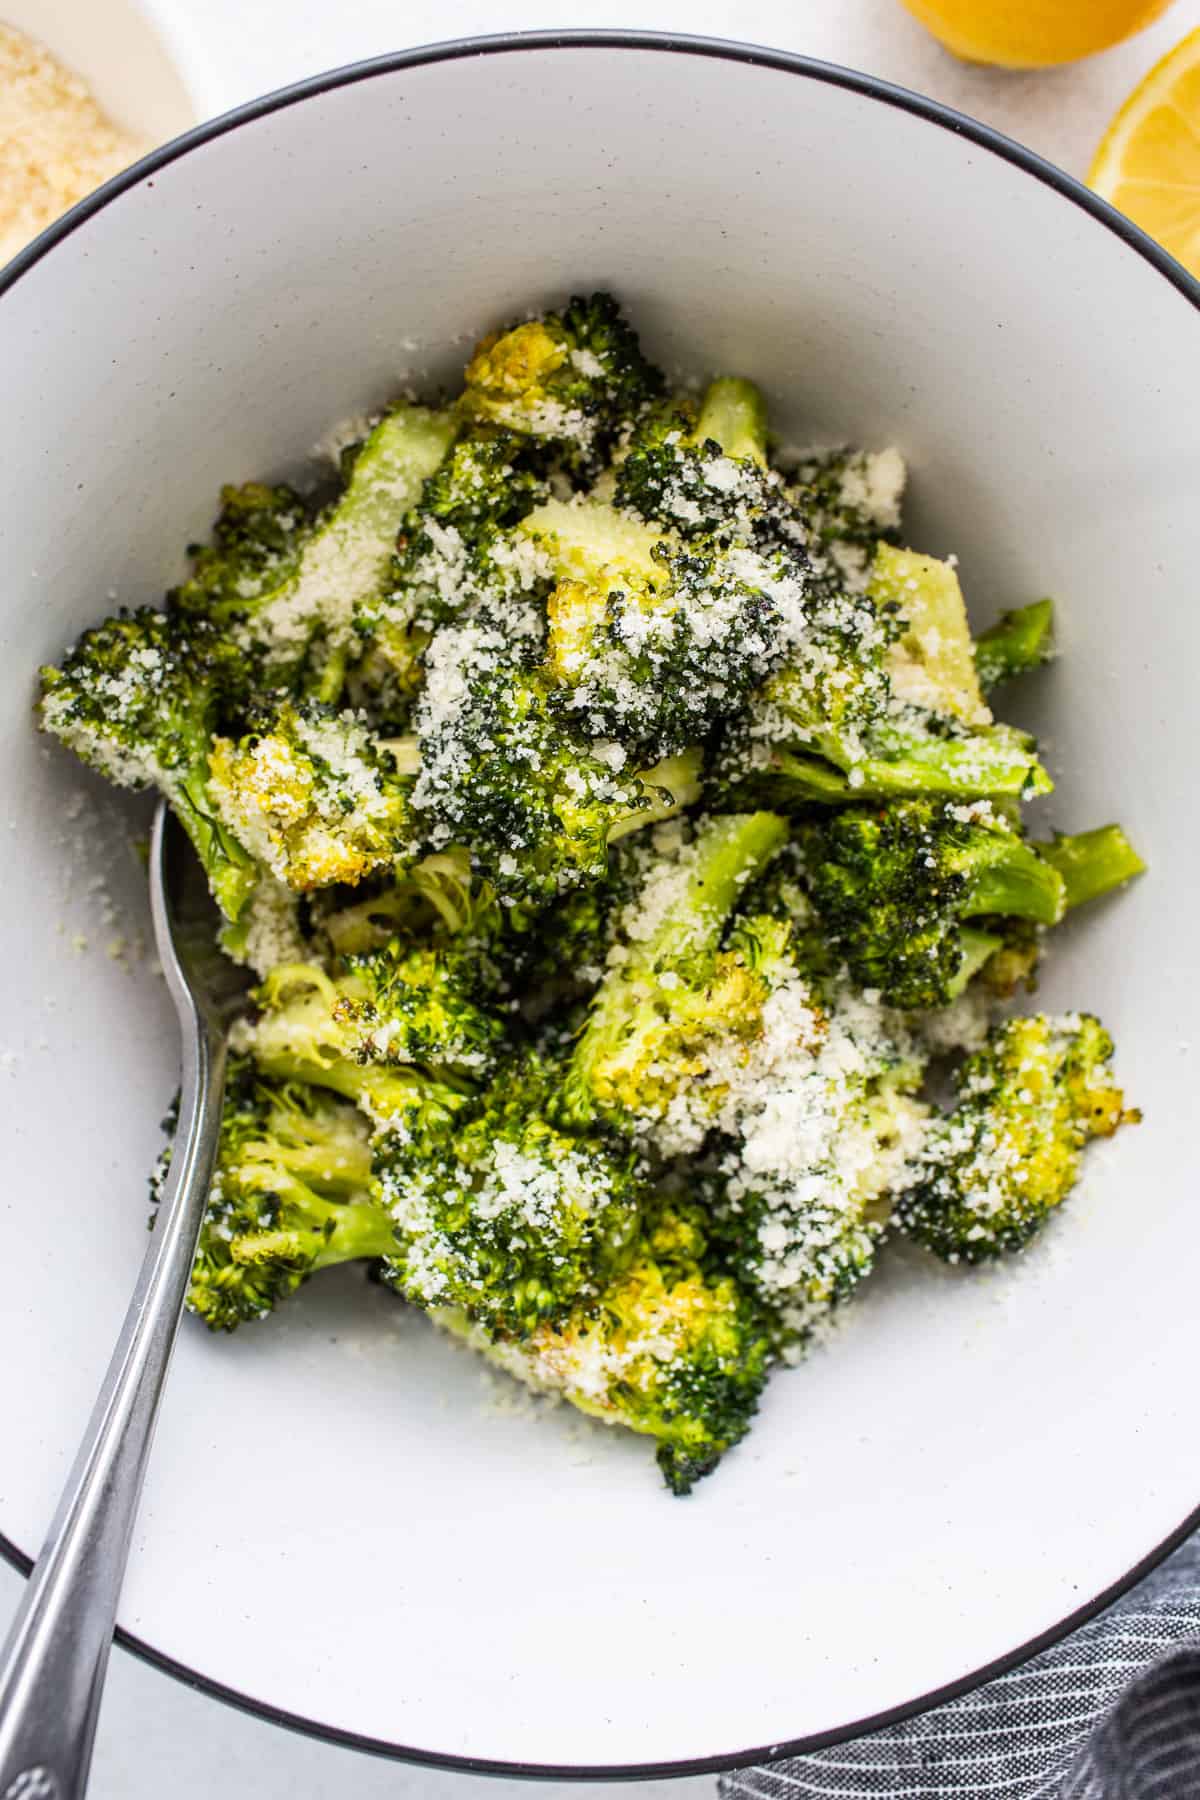 Roasted broccoli topped with parmesan cheese.